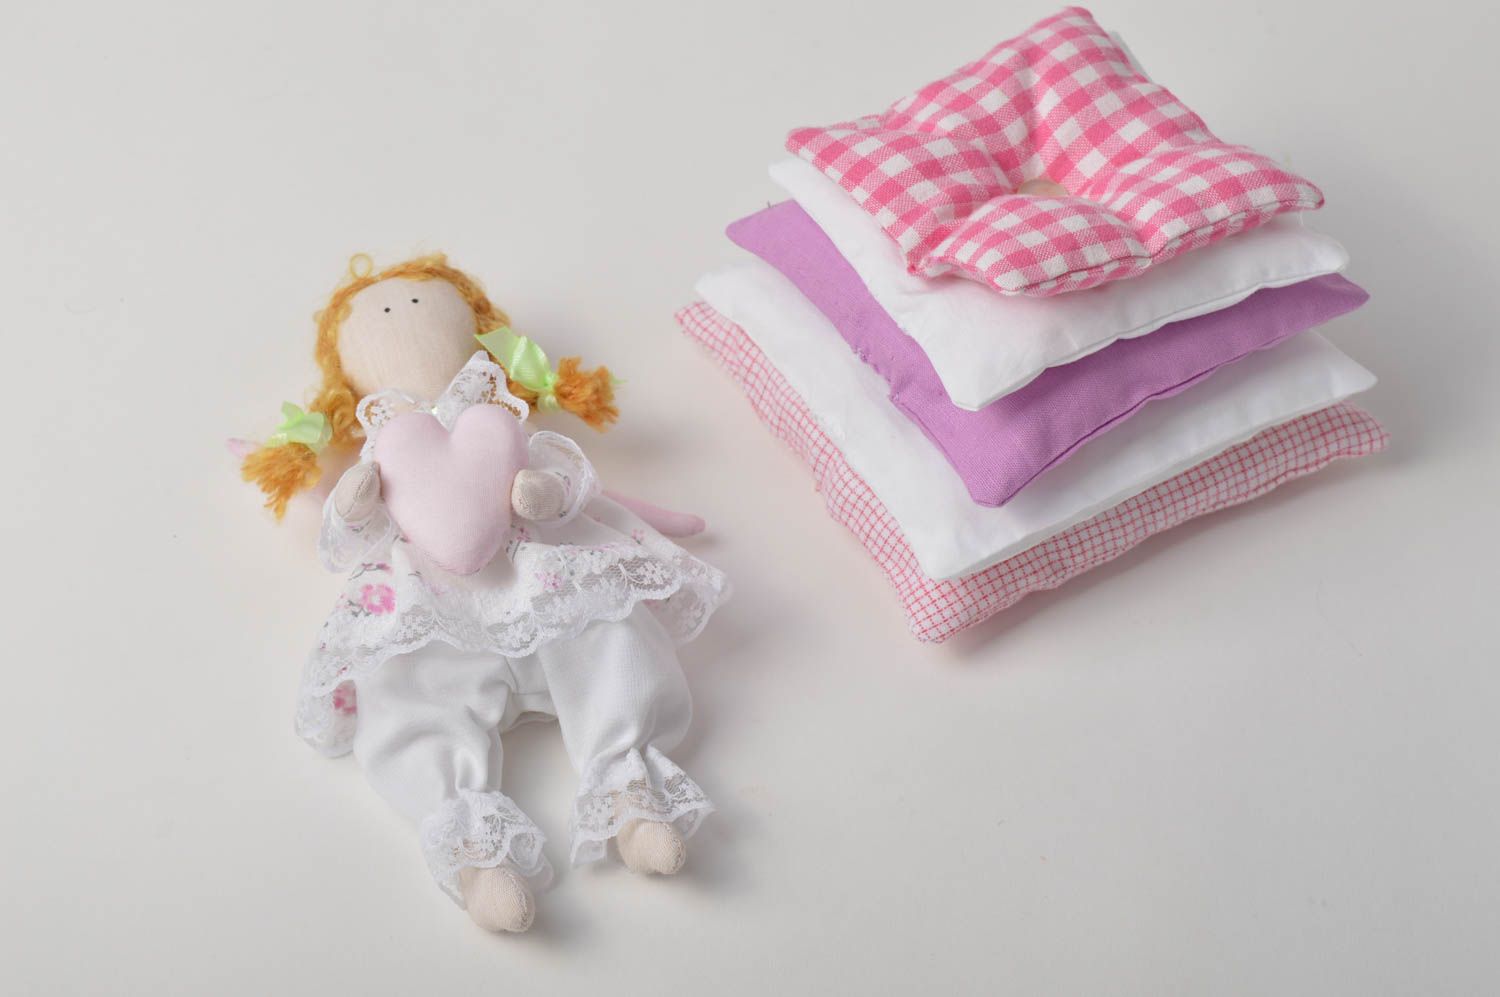 Handmade doll unusual doll with pillow designer toy for girl nursery decor photo 2